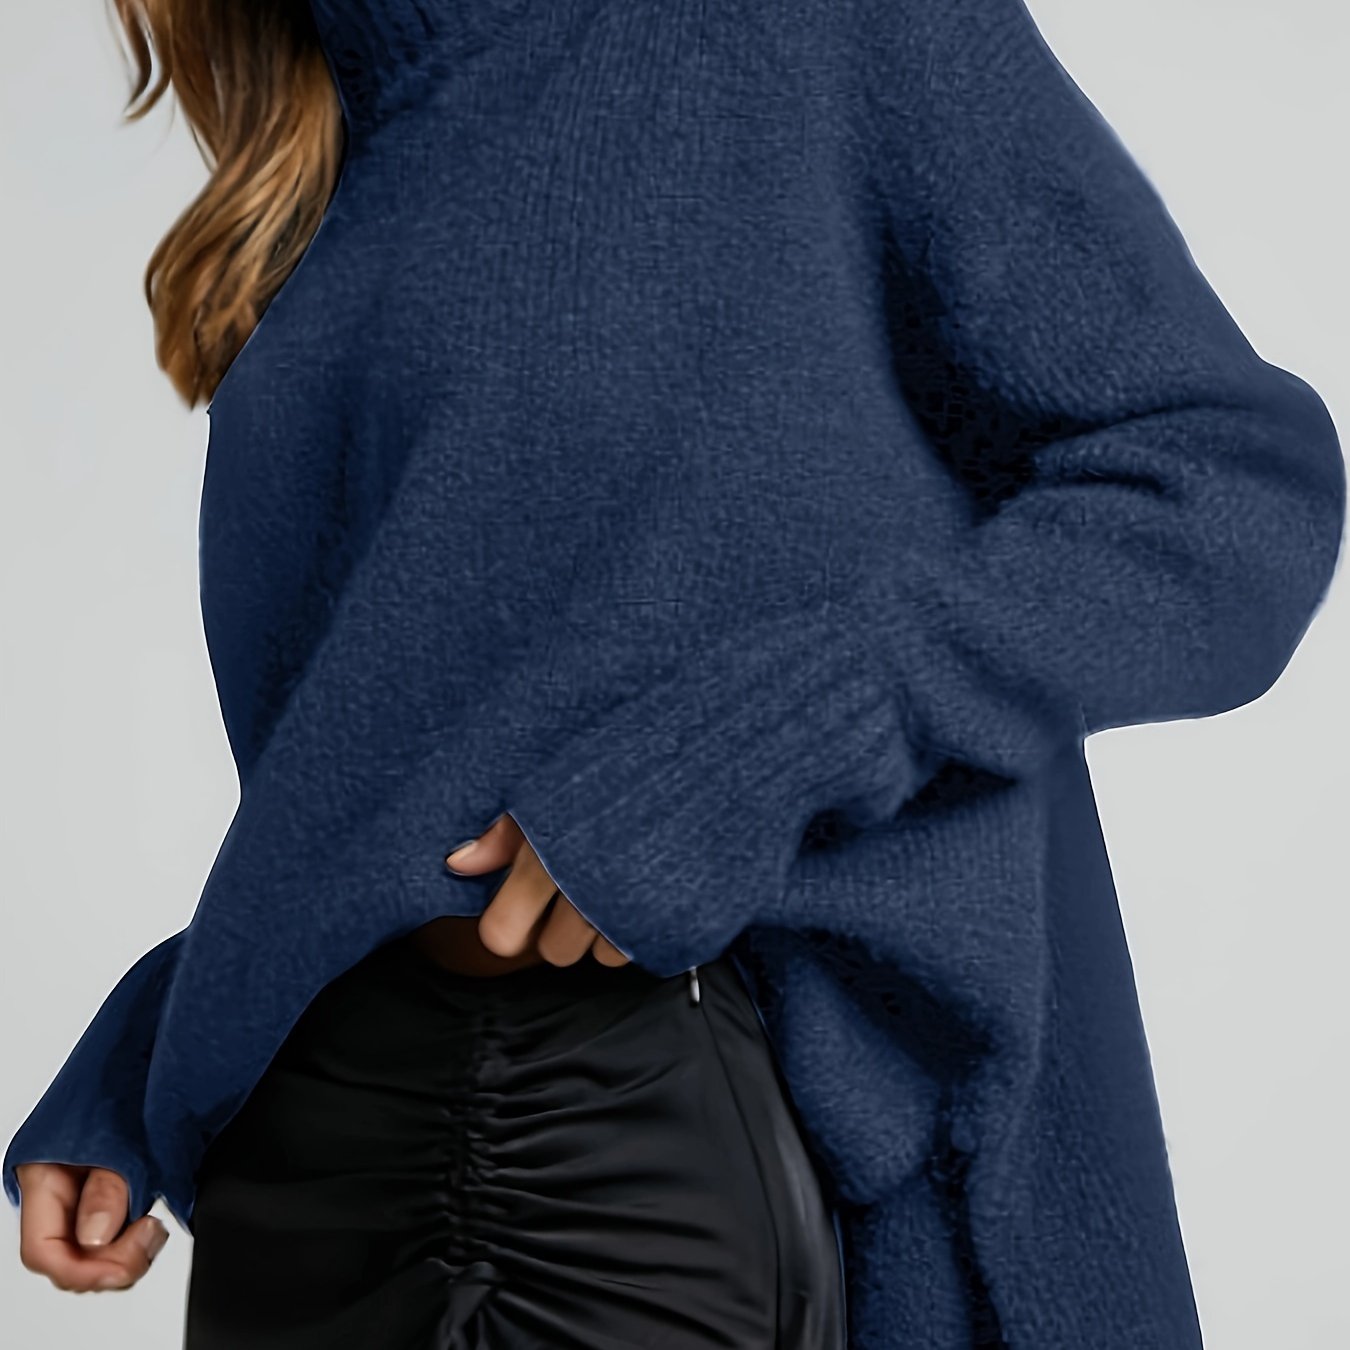 xieyinshe  Solid Turtle Neck Pullover Sweater, Casual Long Sleeve Split Oversized Sweater, Women's Clothing